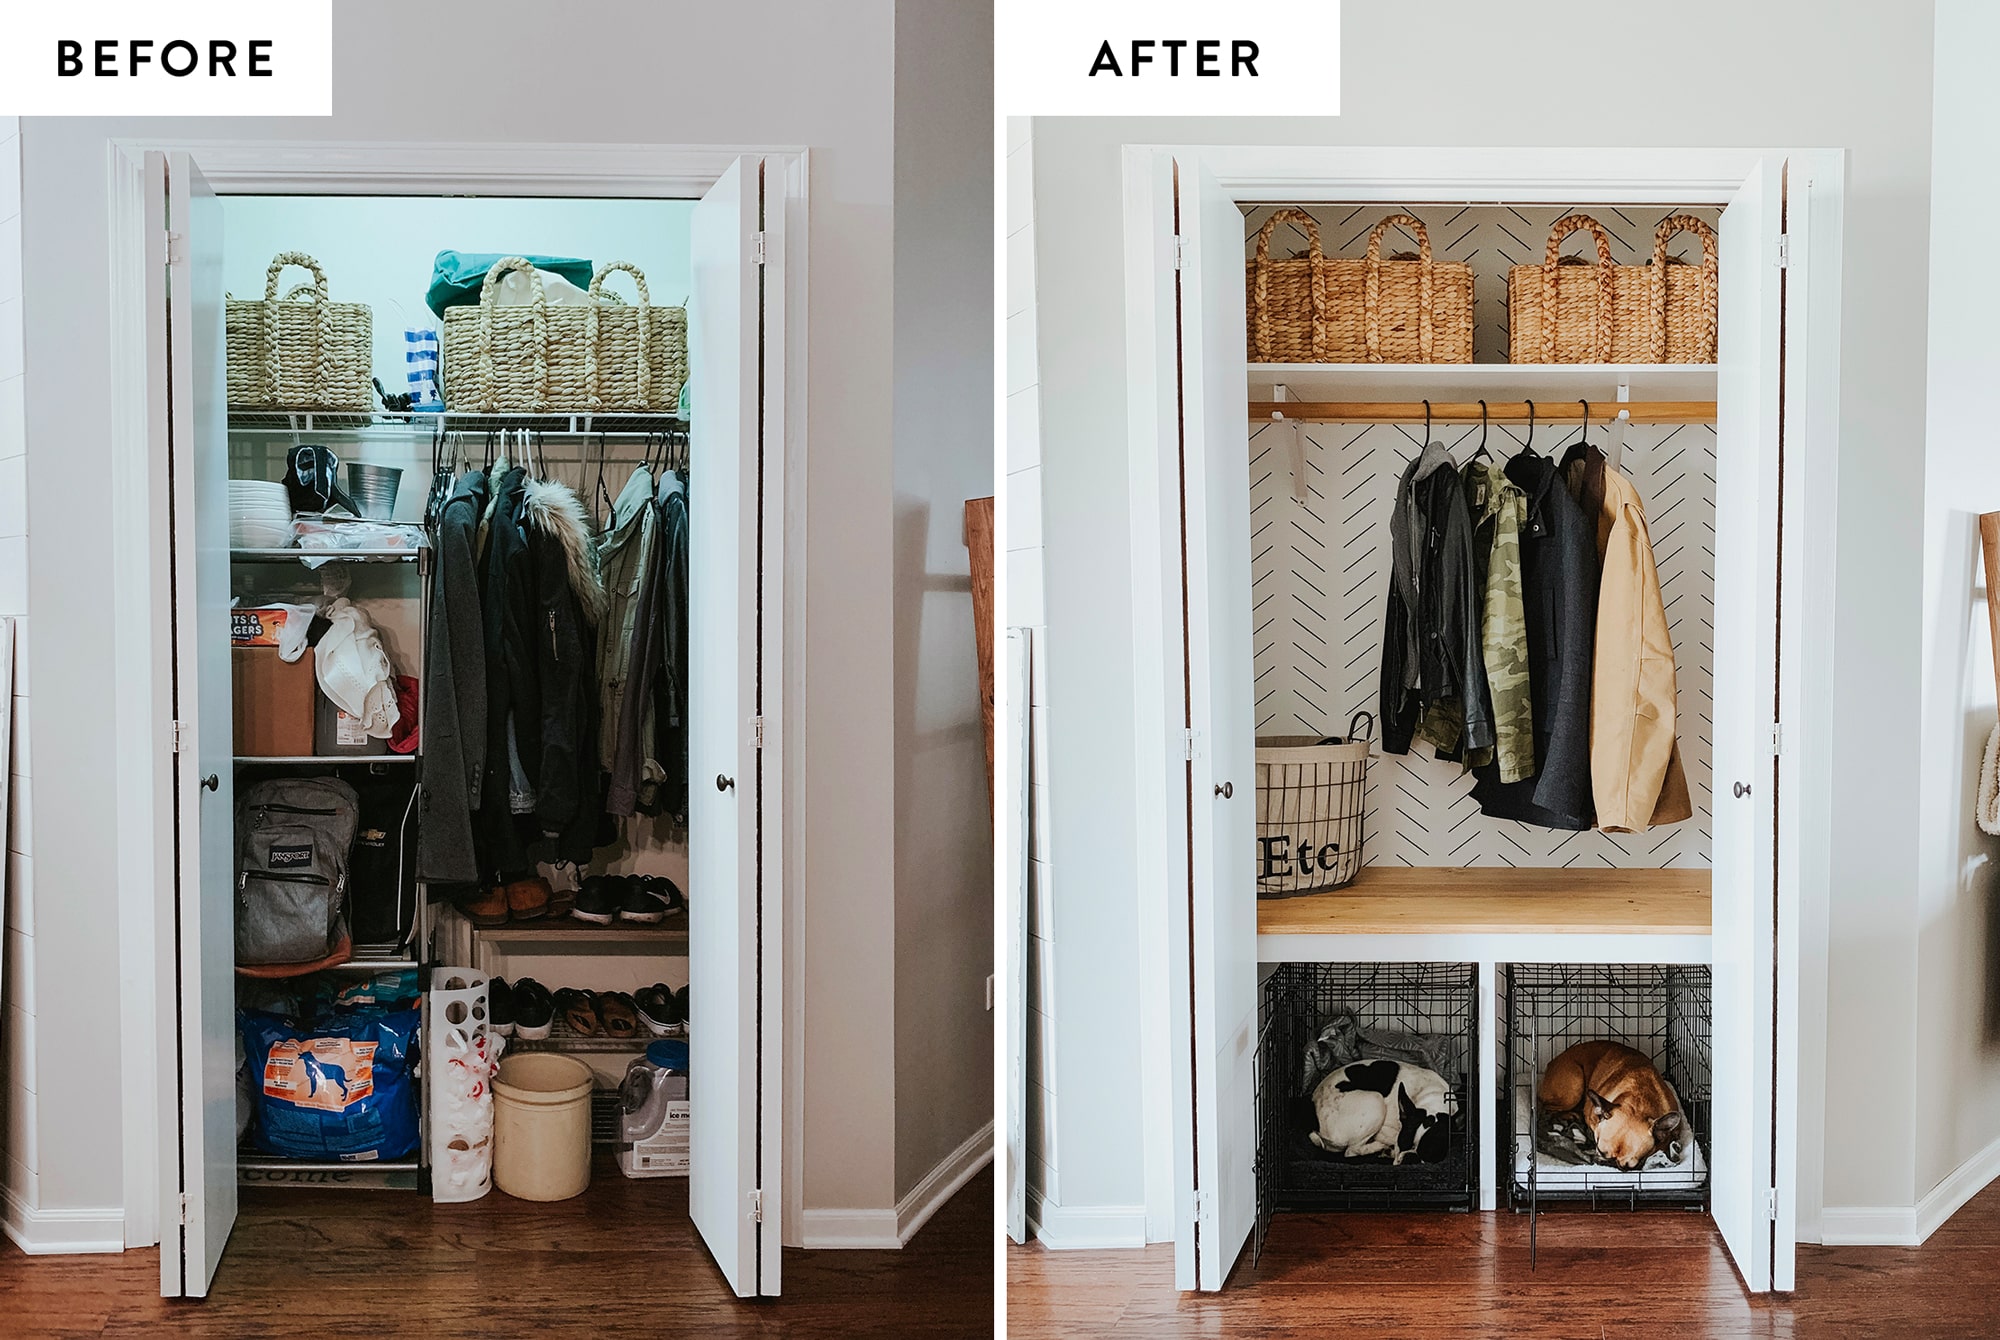 How To Organize an Entry Way Closet / Make the Most of an Awkward